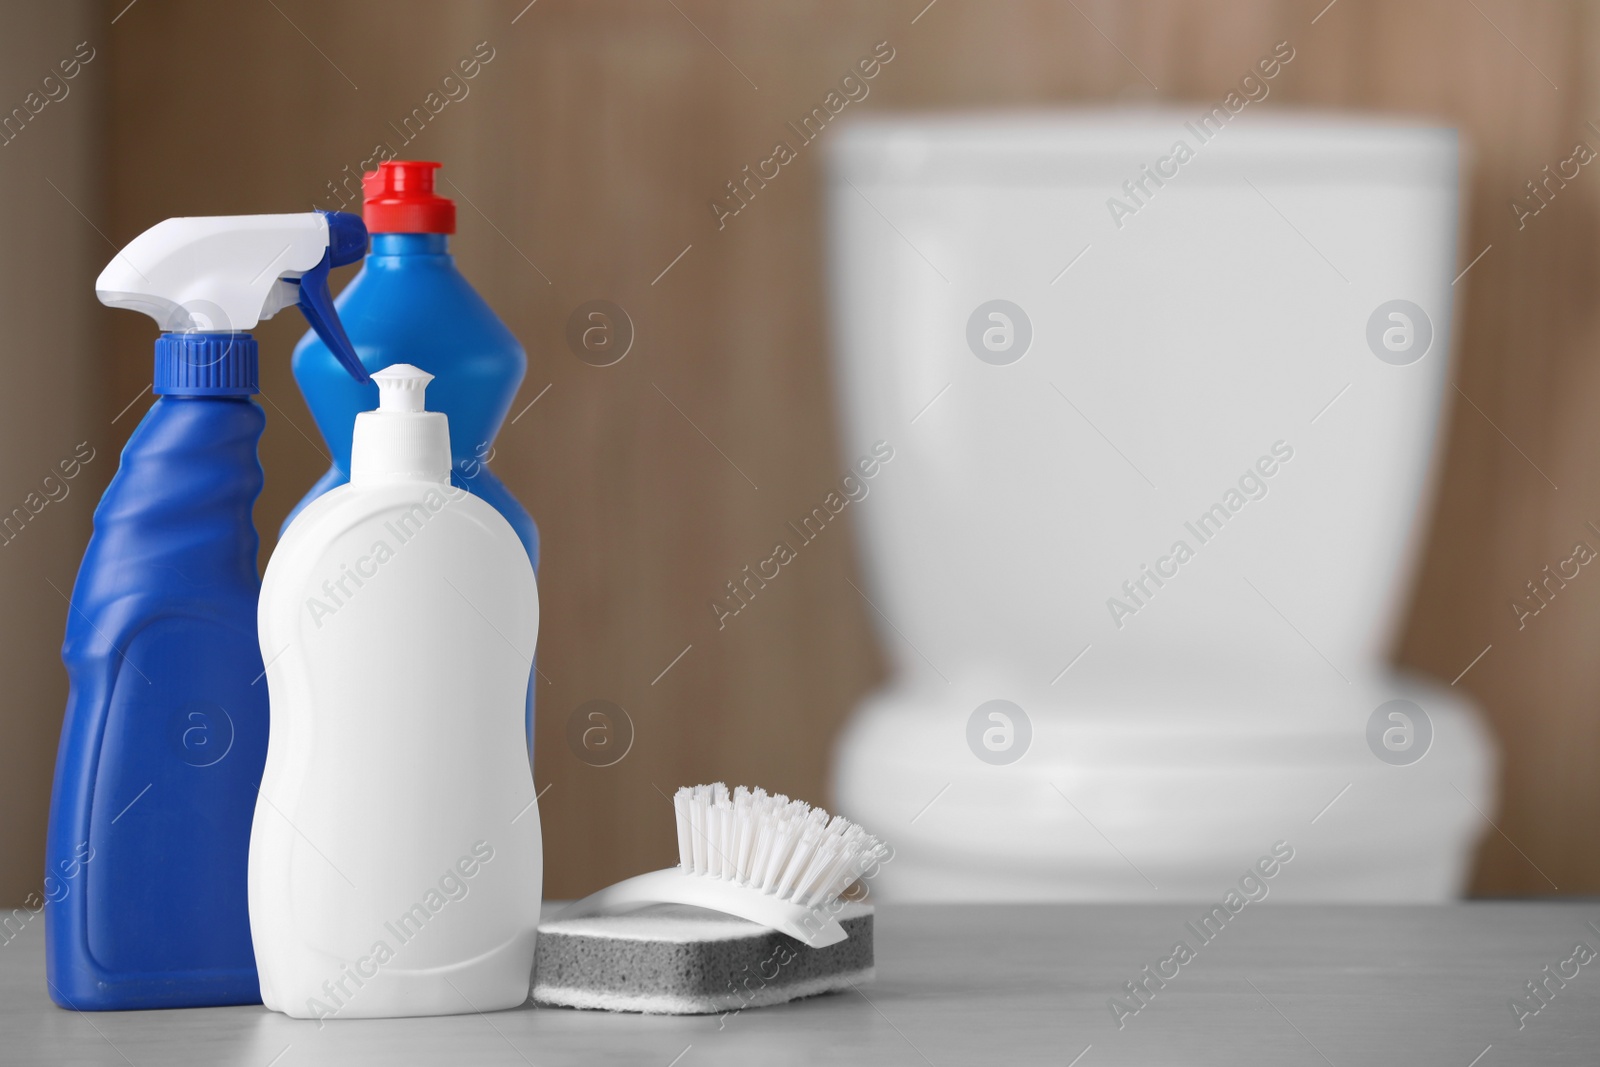 Photo of Bottles, sponge and toilet brush on table indoors, space for text. Cleaning supplies